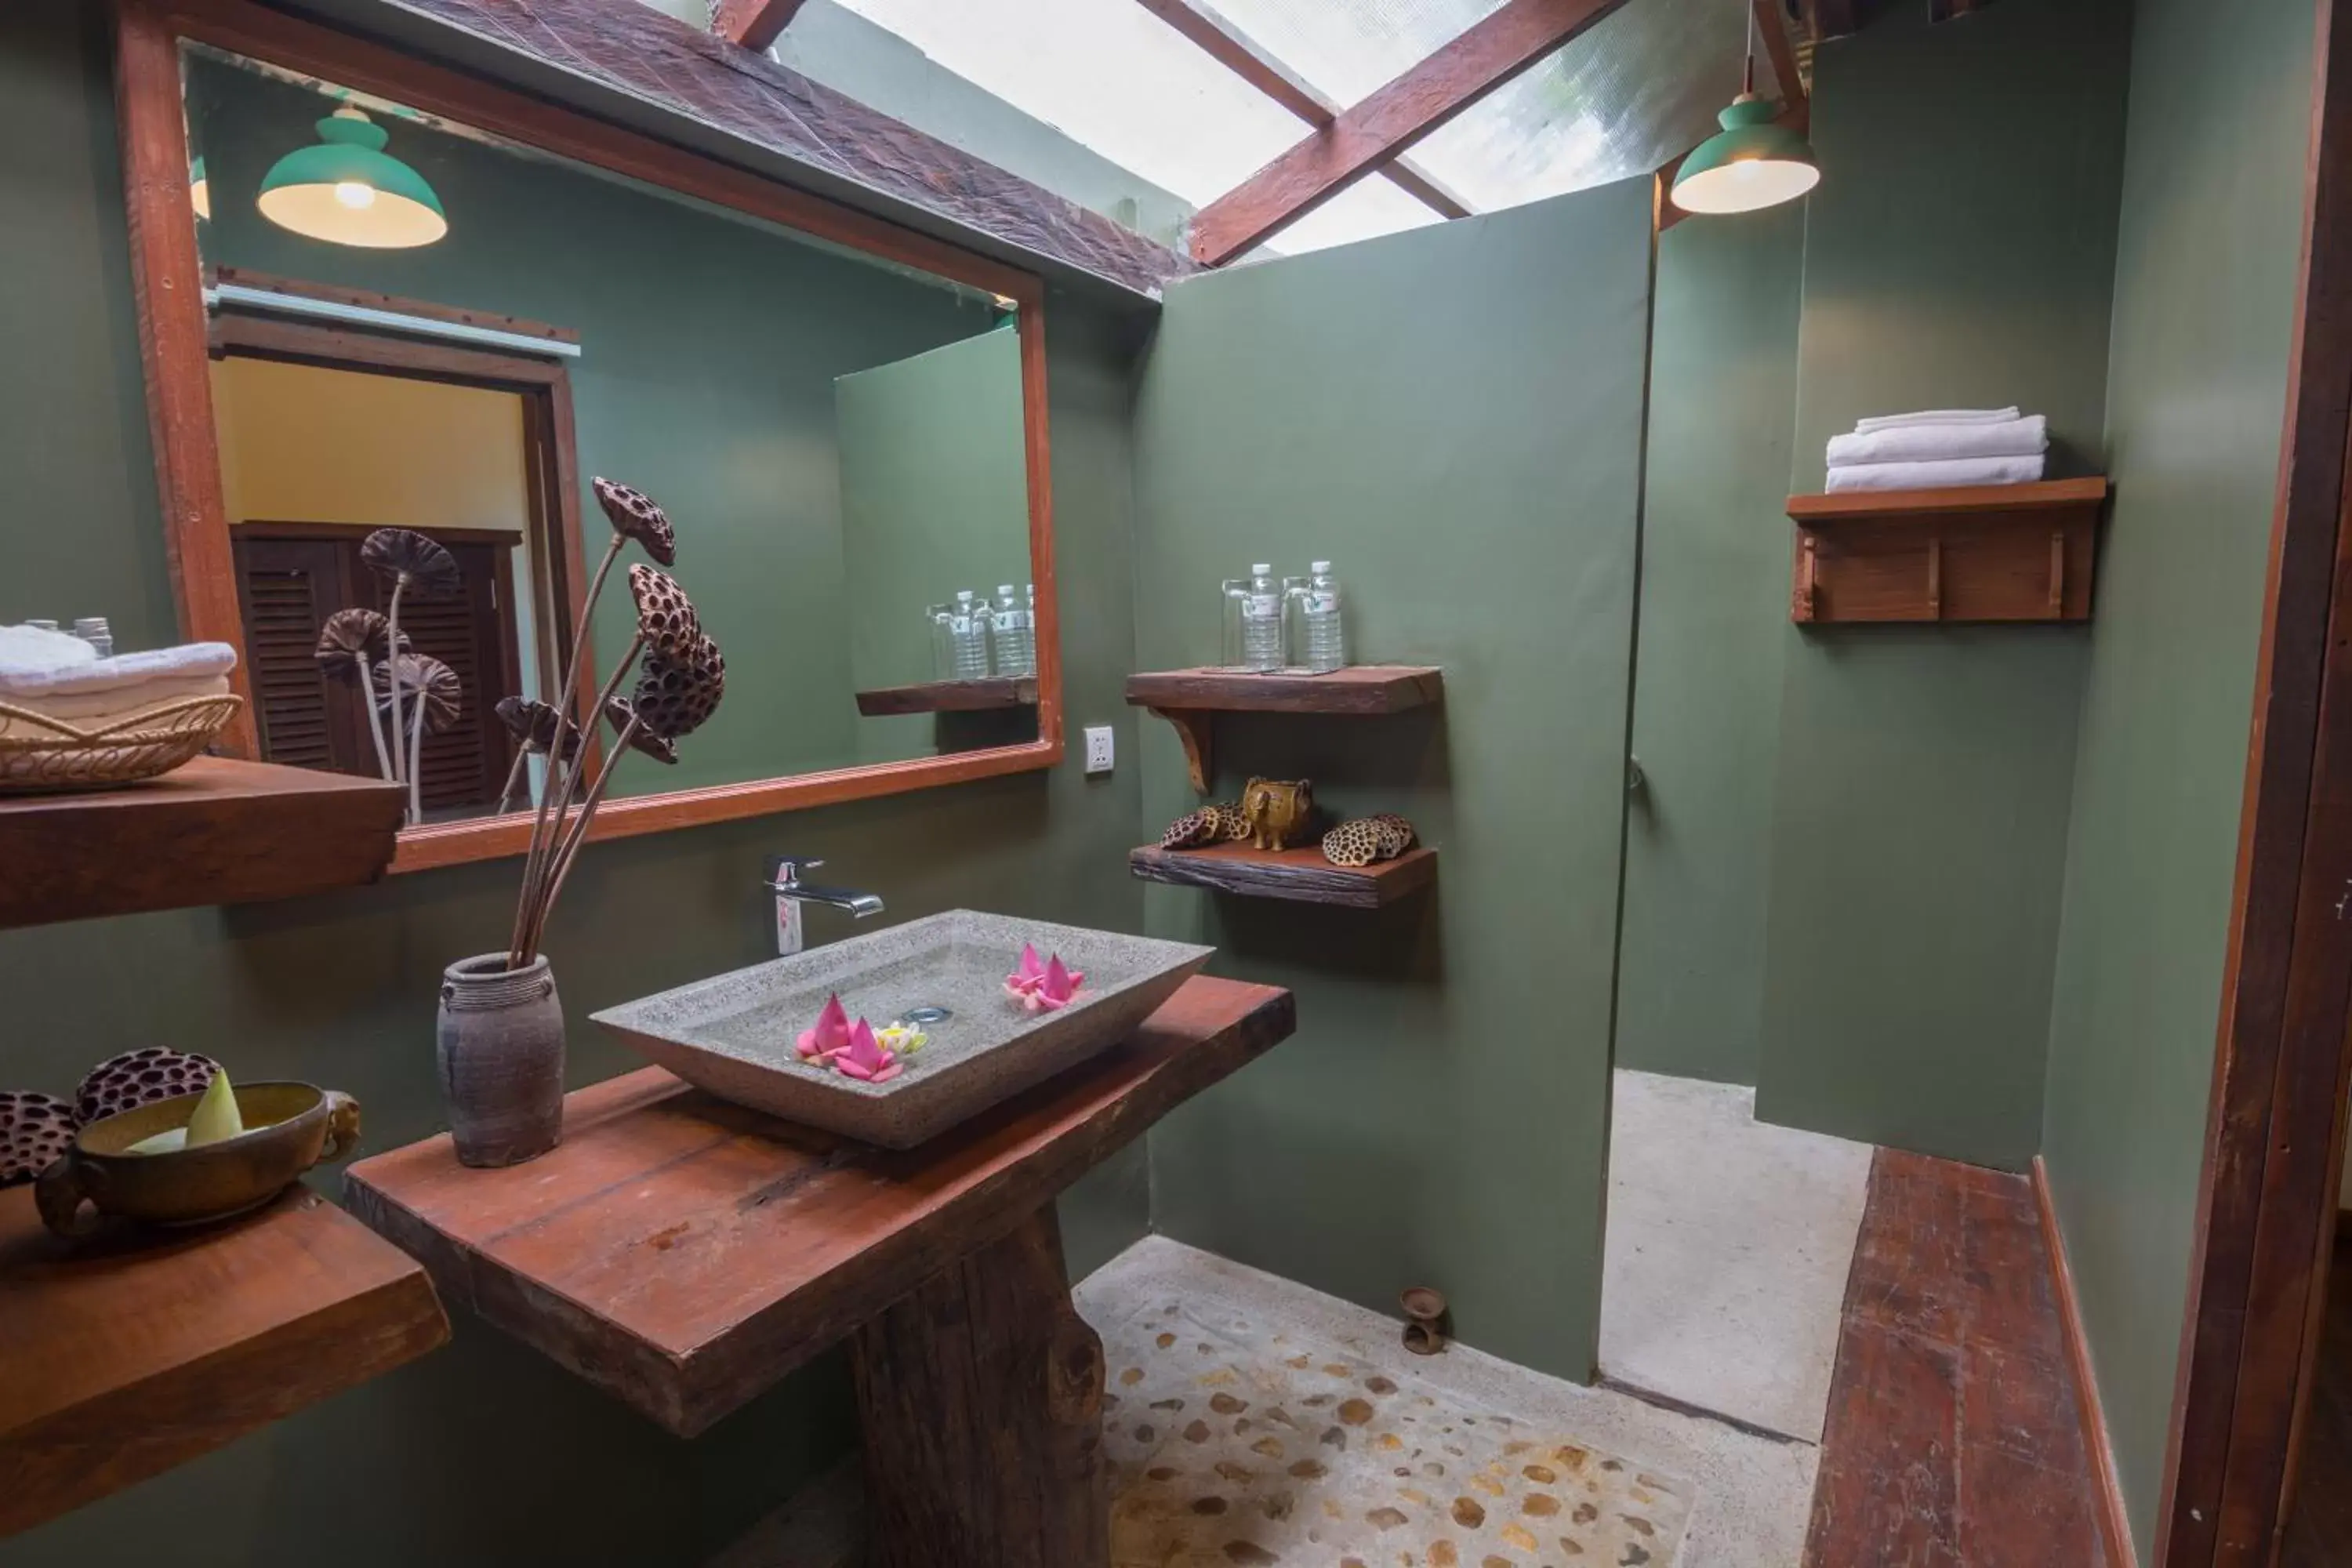 Bathroom in Bong Thom Forest Lodge